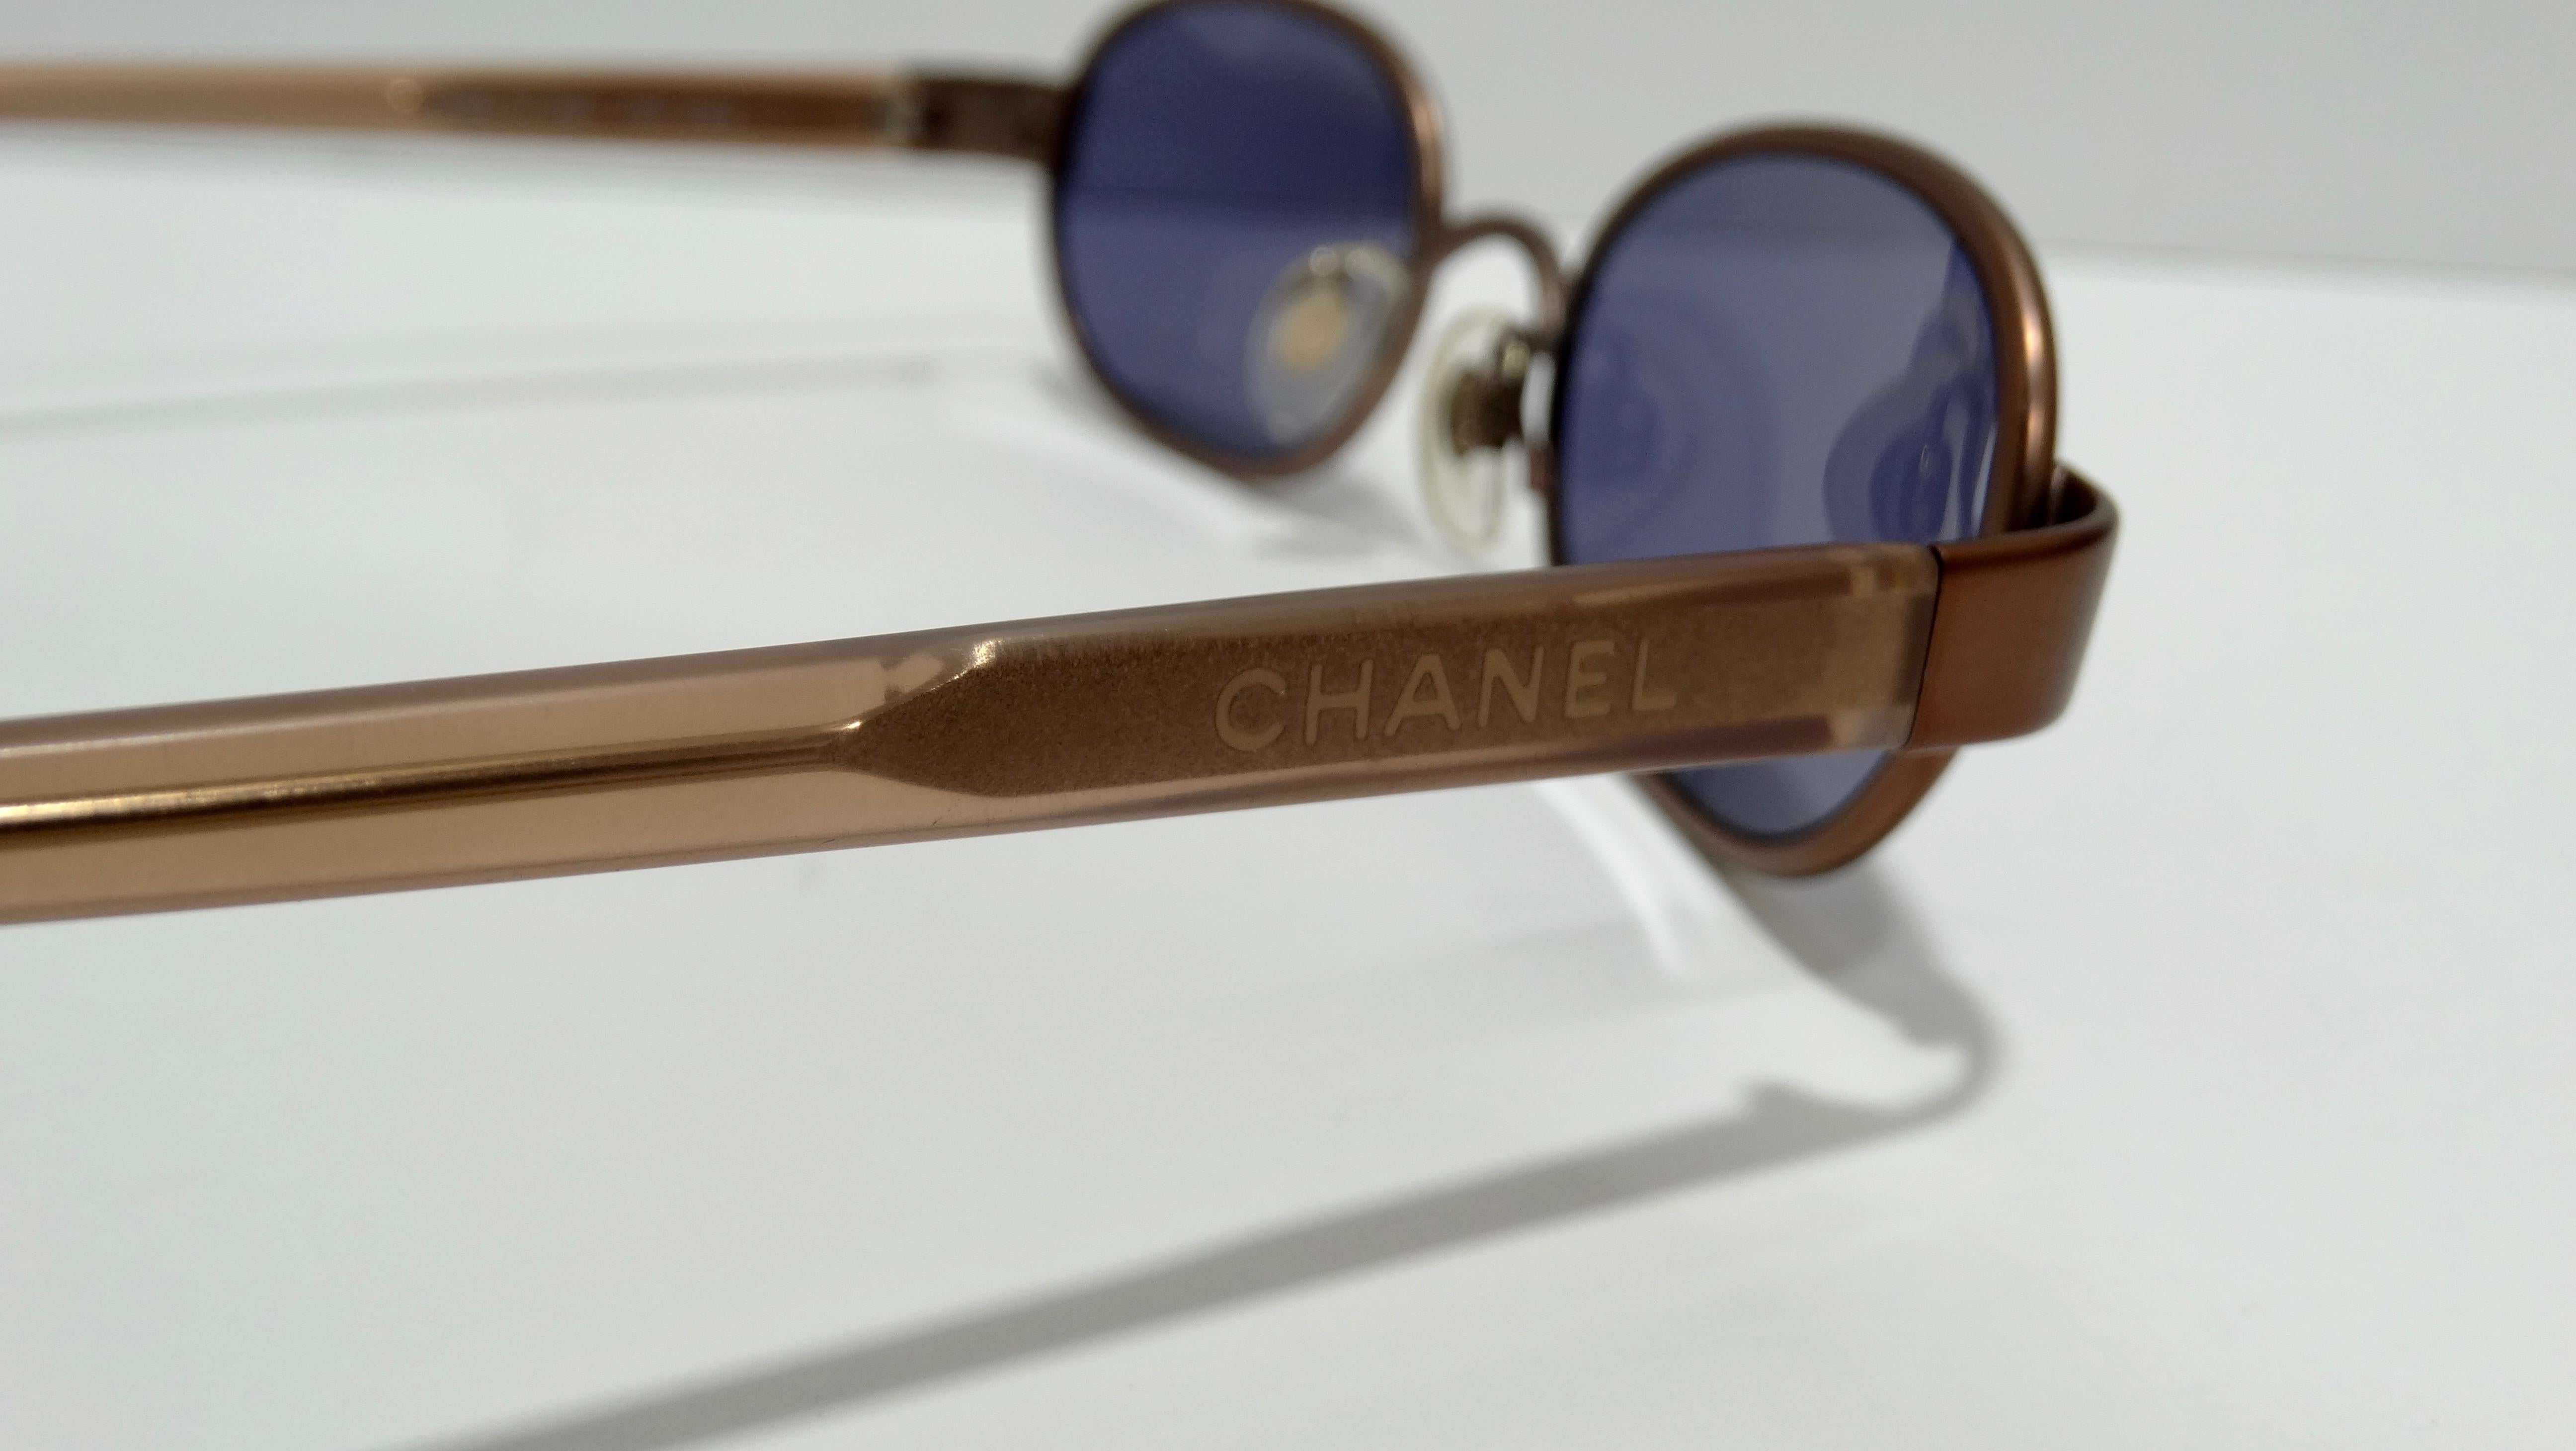 Chanel Vintage Rose Bronze Oval Sunglasses In Good Condition For Sale In Scottsdale, AZ